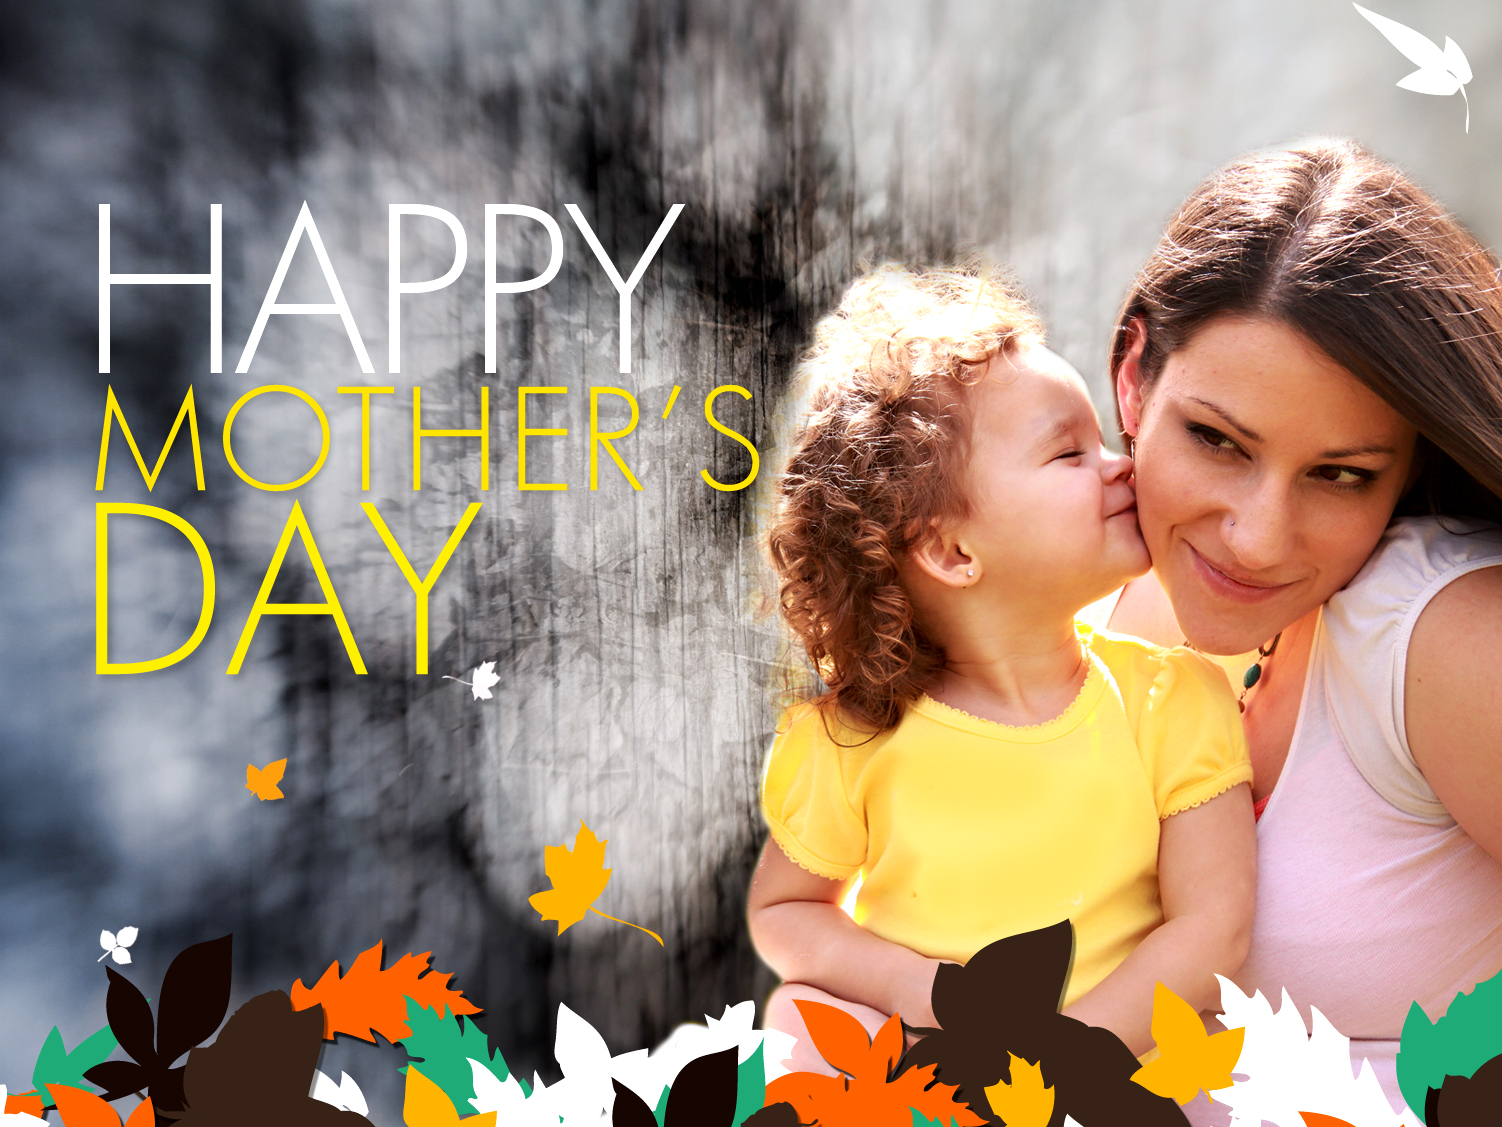 Advance Happy Mothers Day Wishing Facebook Cover Photos Free Download